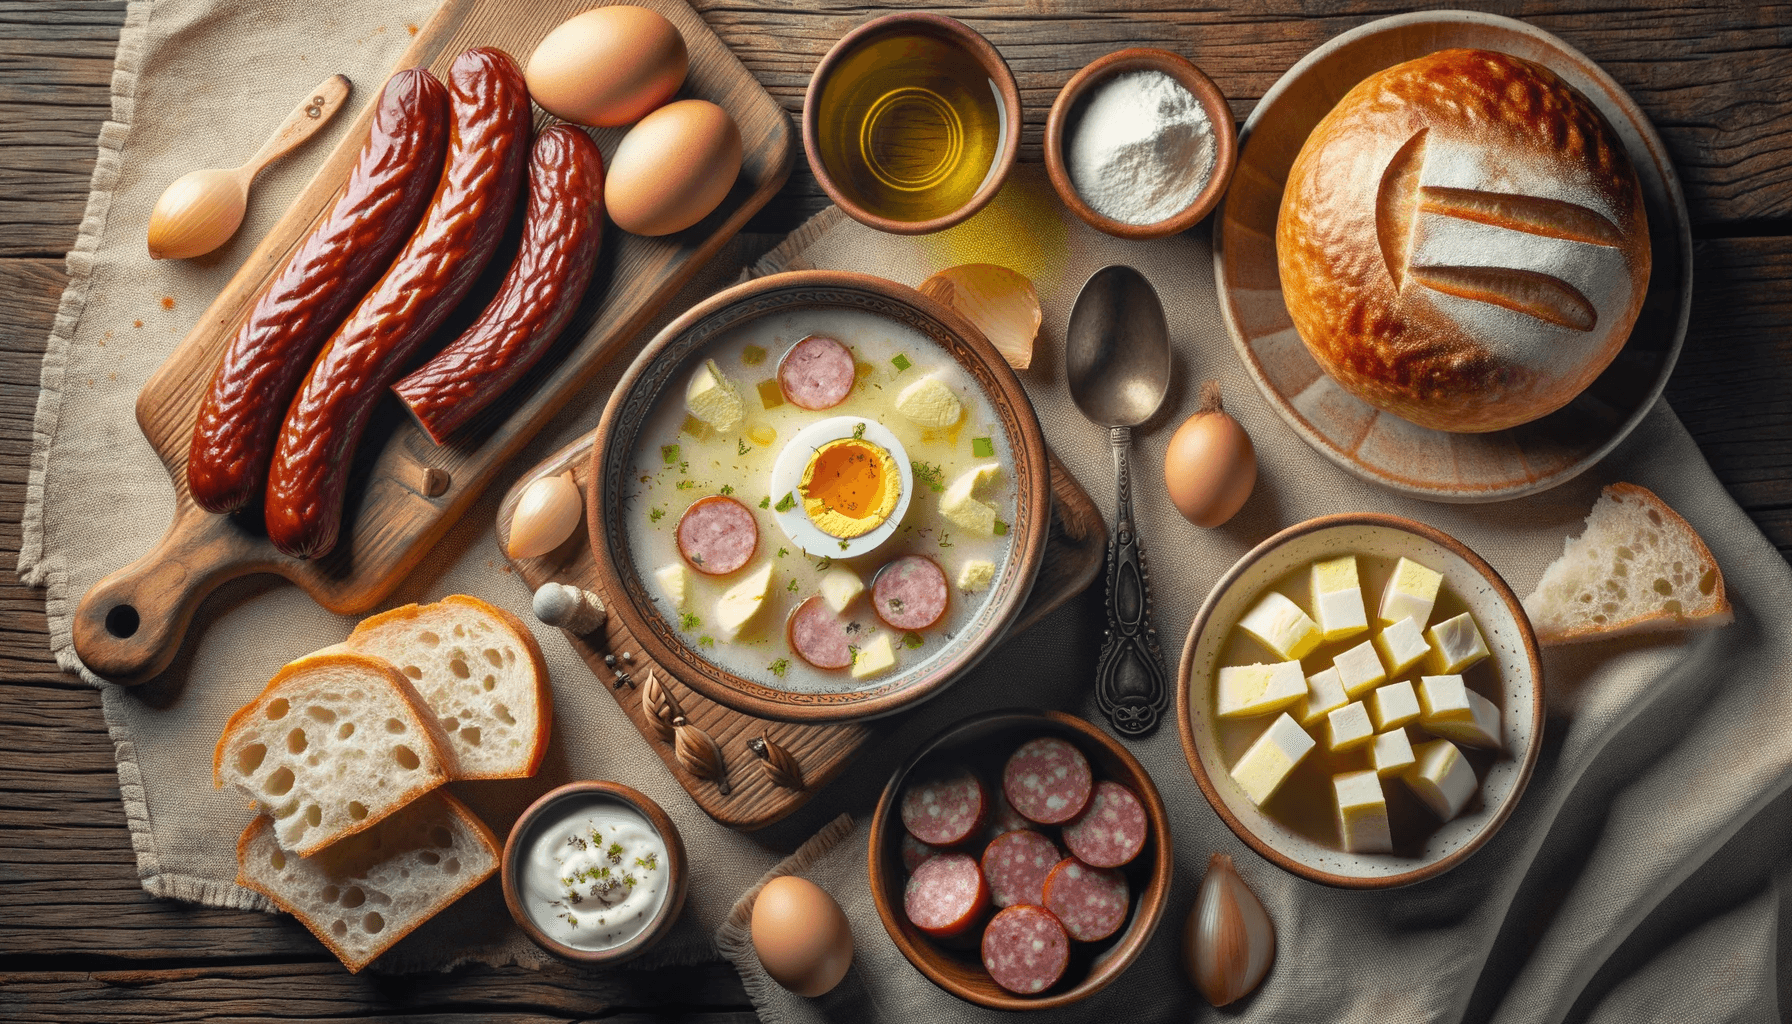 Traditional dishes of Polish cuisine